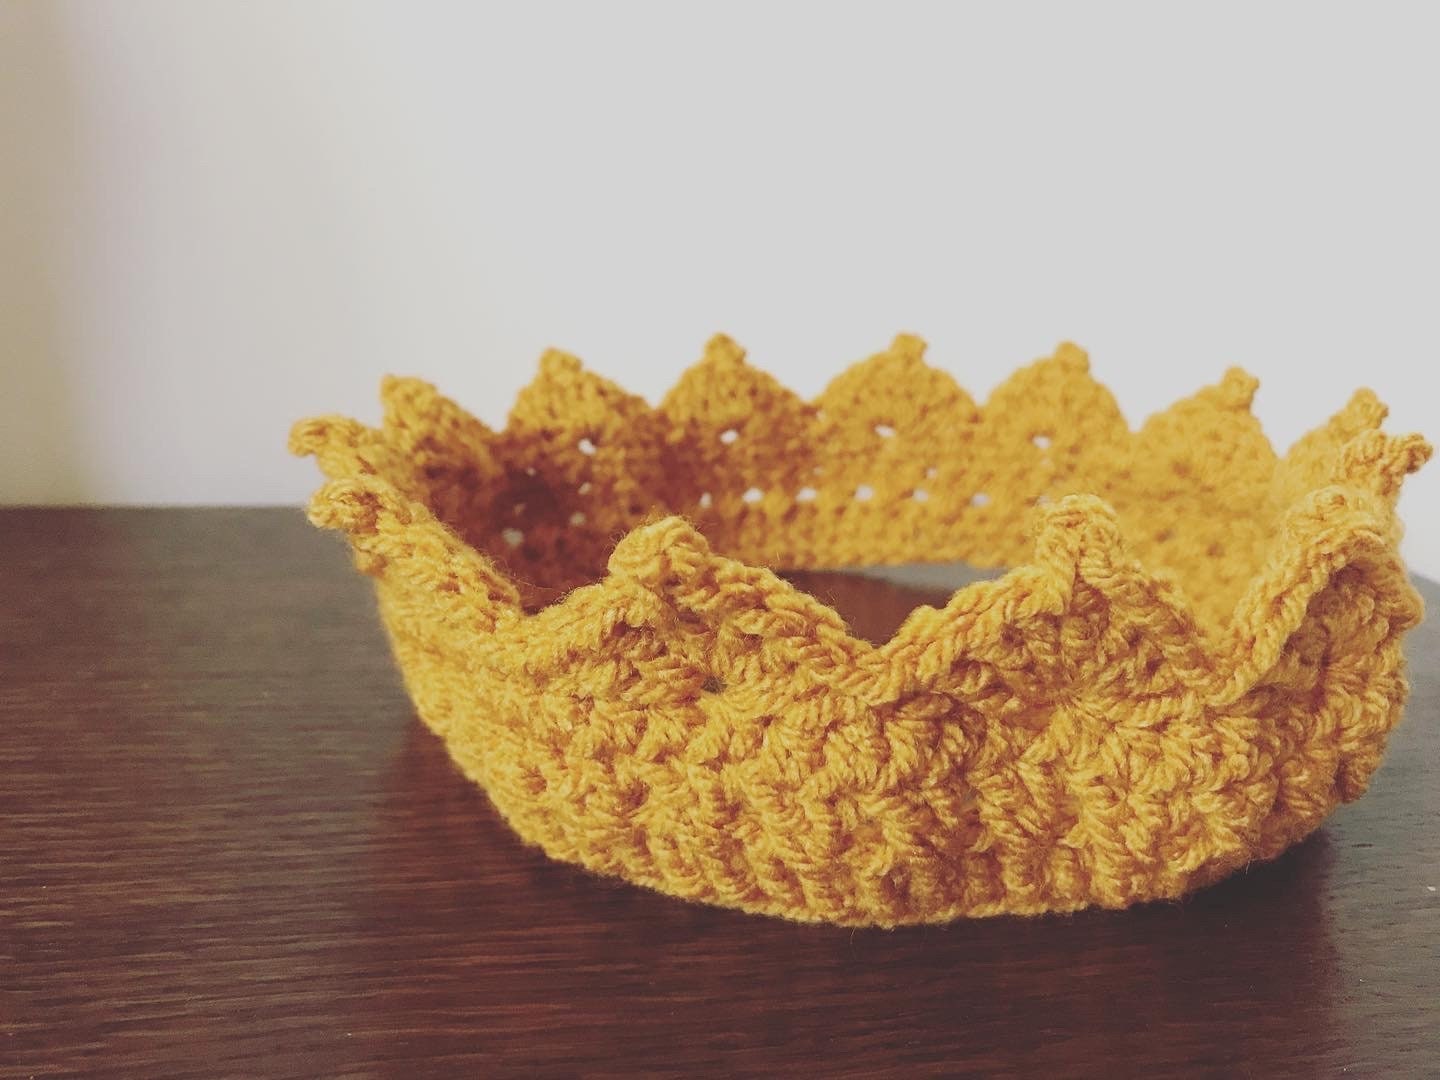 Crown Christmas Crochet Kit. Christmas Dinner Party Hat. Holiday